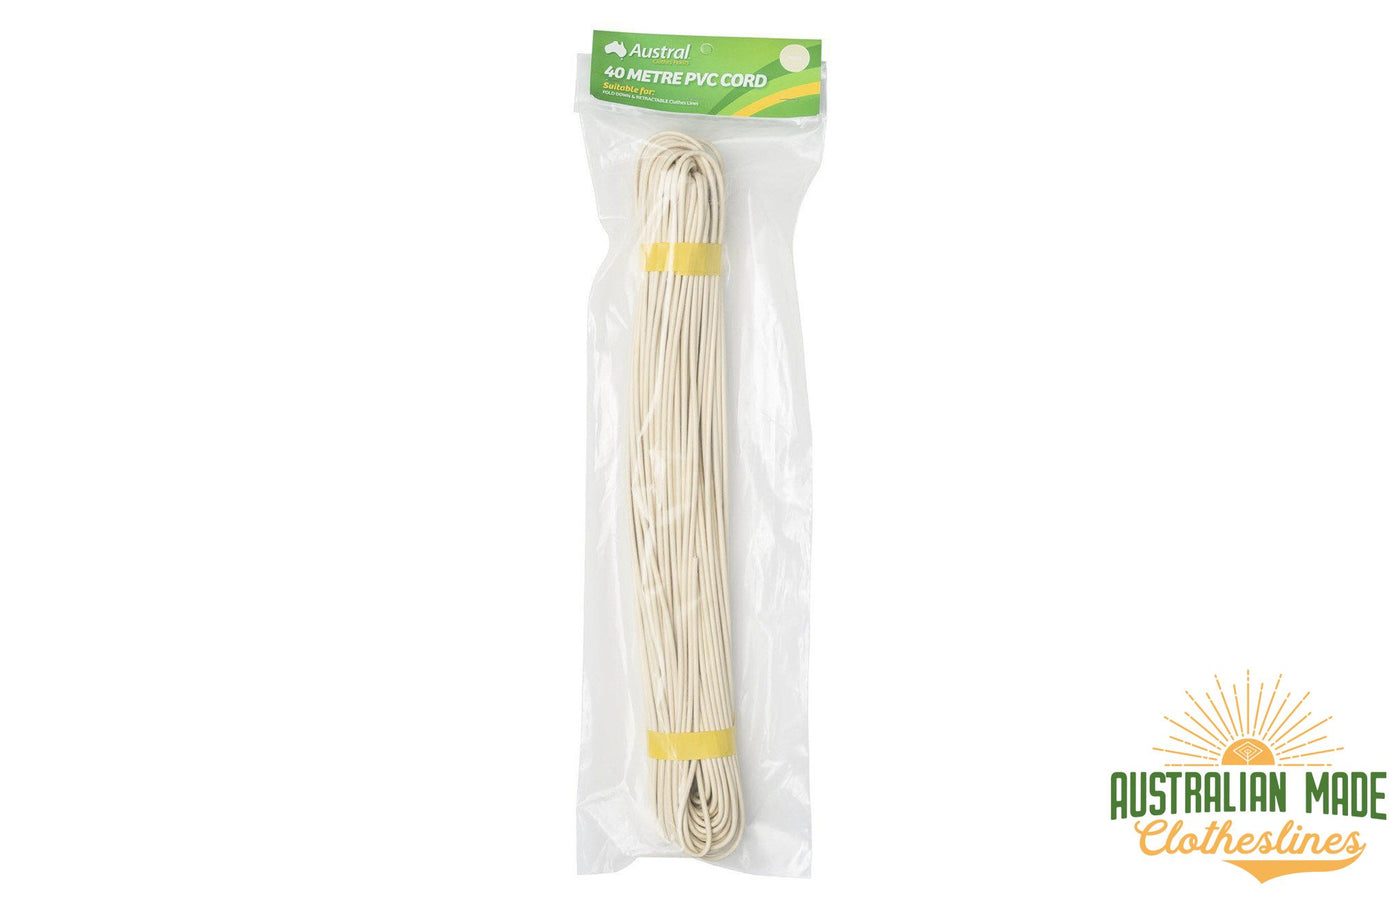 Austral 40m Clothesline Cord - Classic Cream wrapped - Australian Made Clotheslines